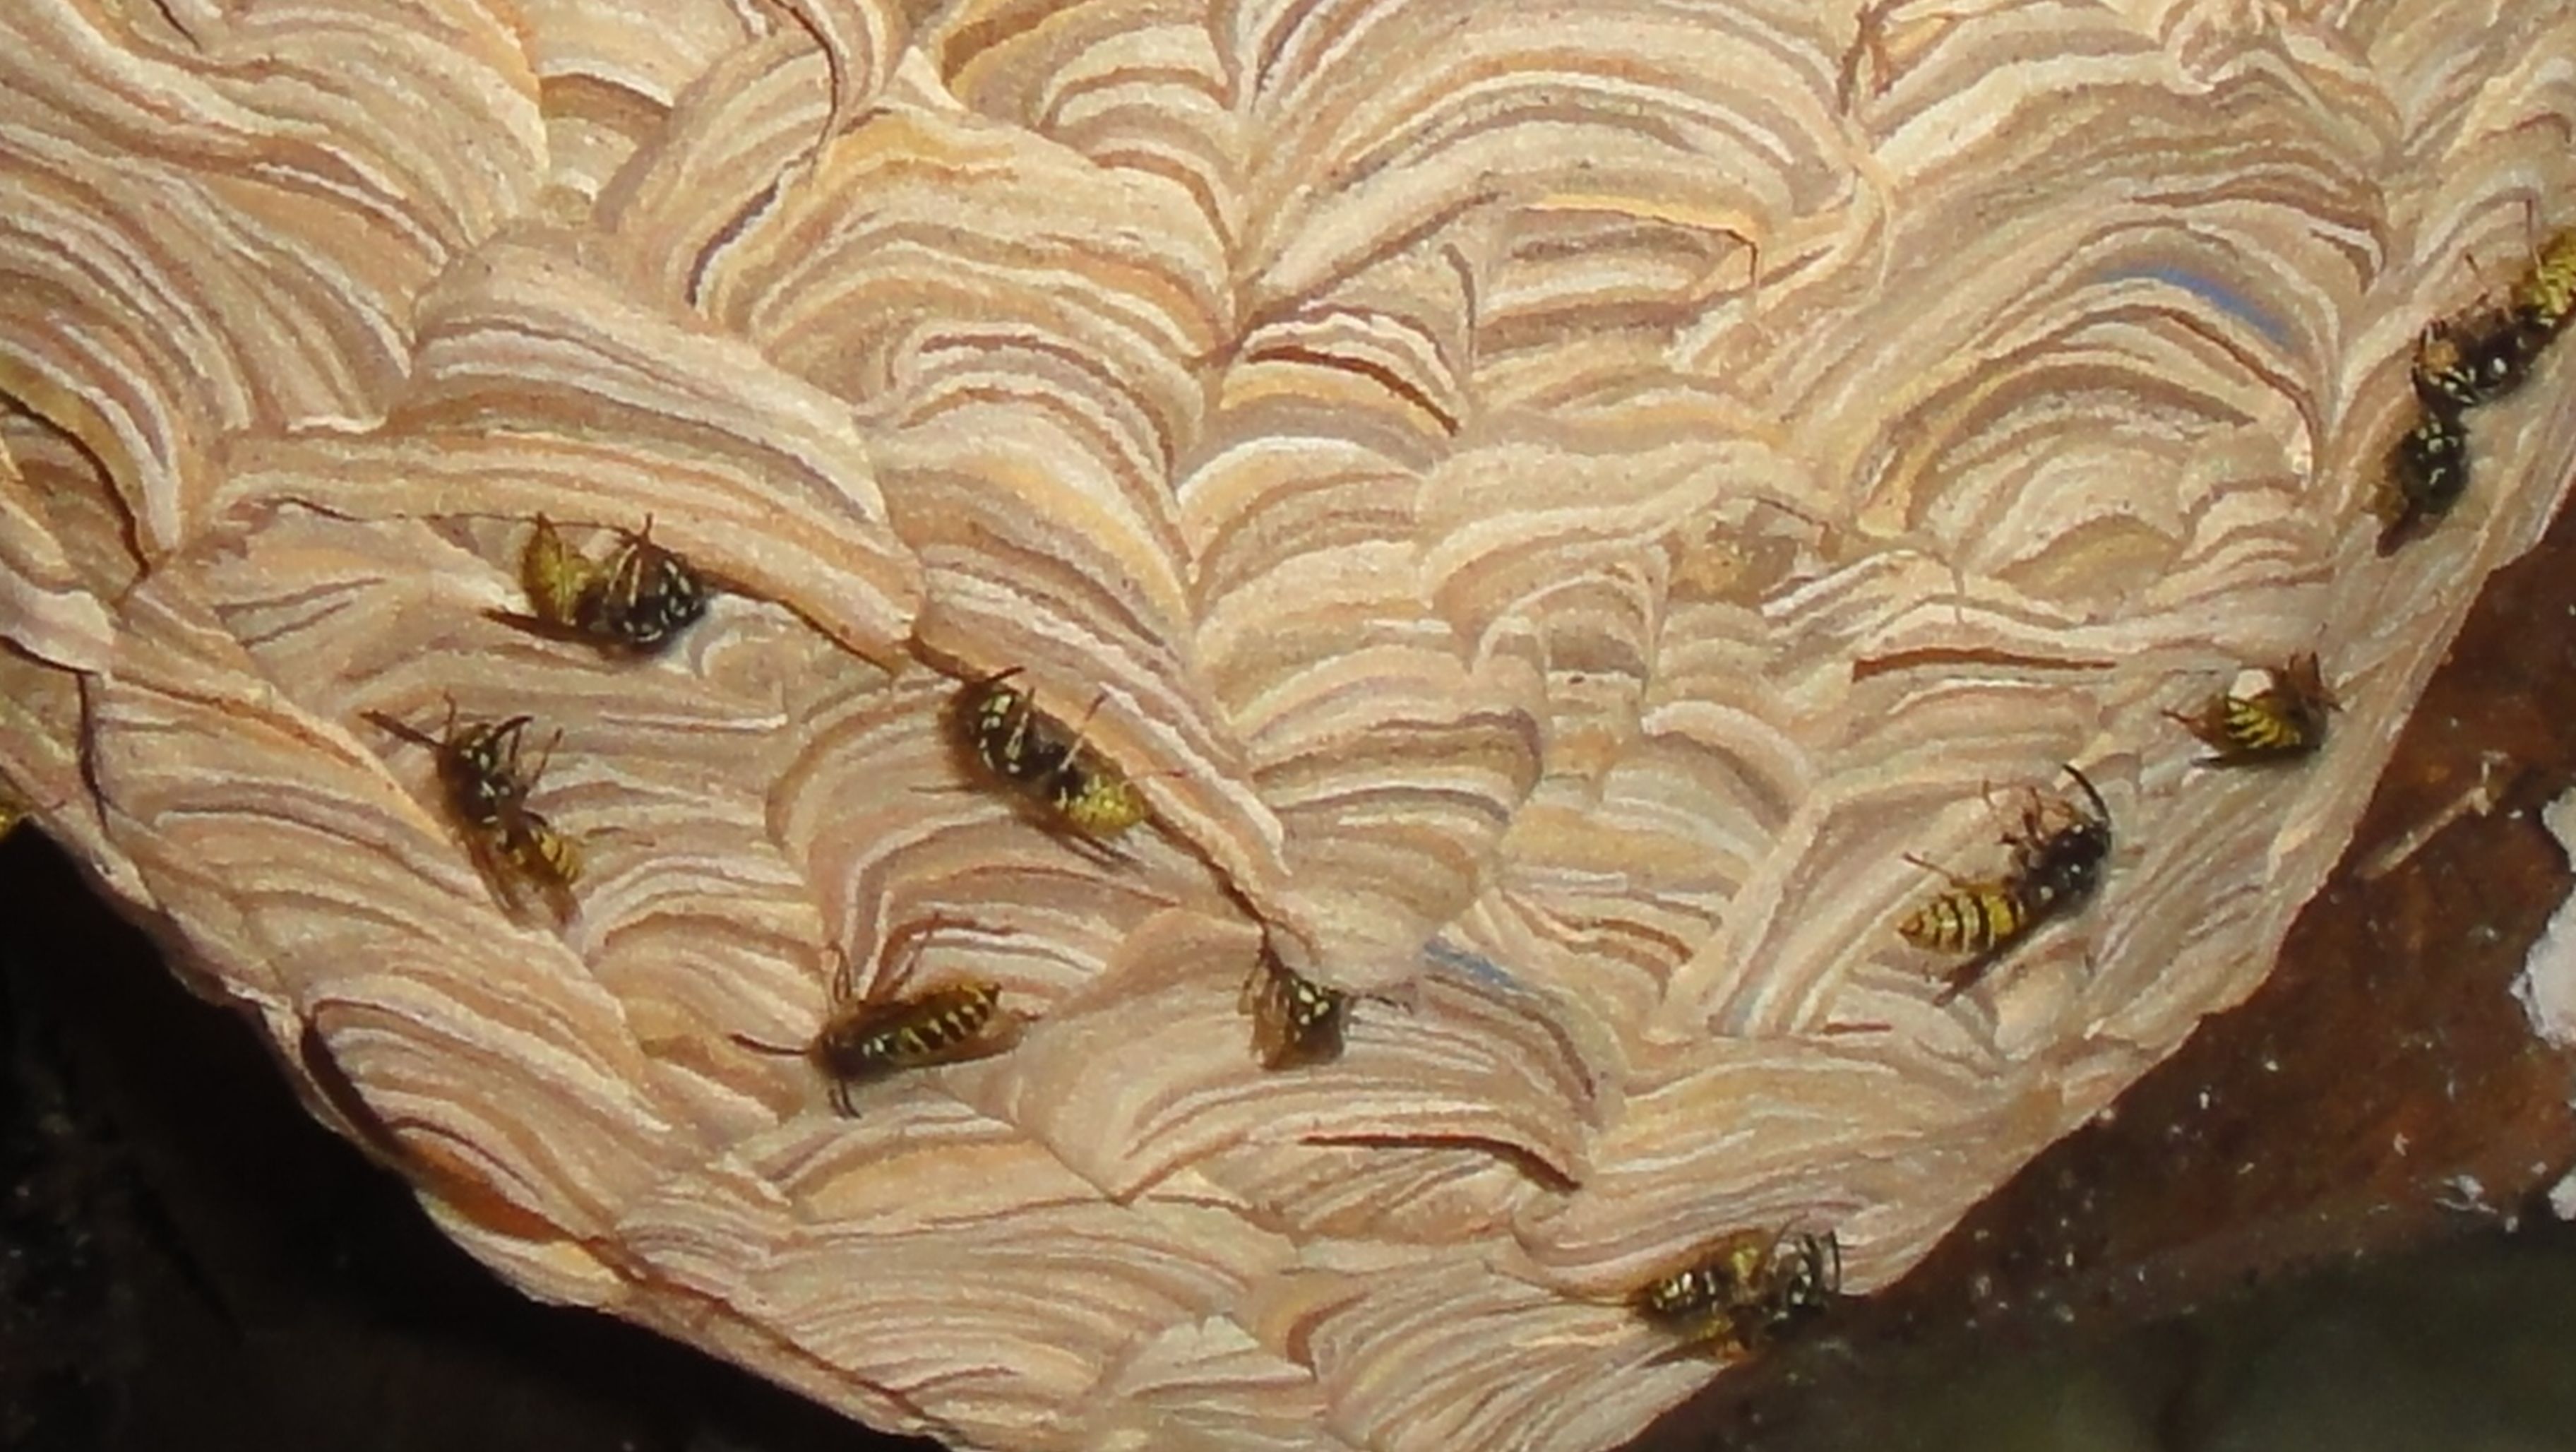 wasps nest with wasps | nests | Pinterest | Wasp nest, Wasp and Animal